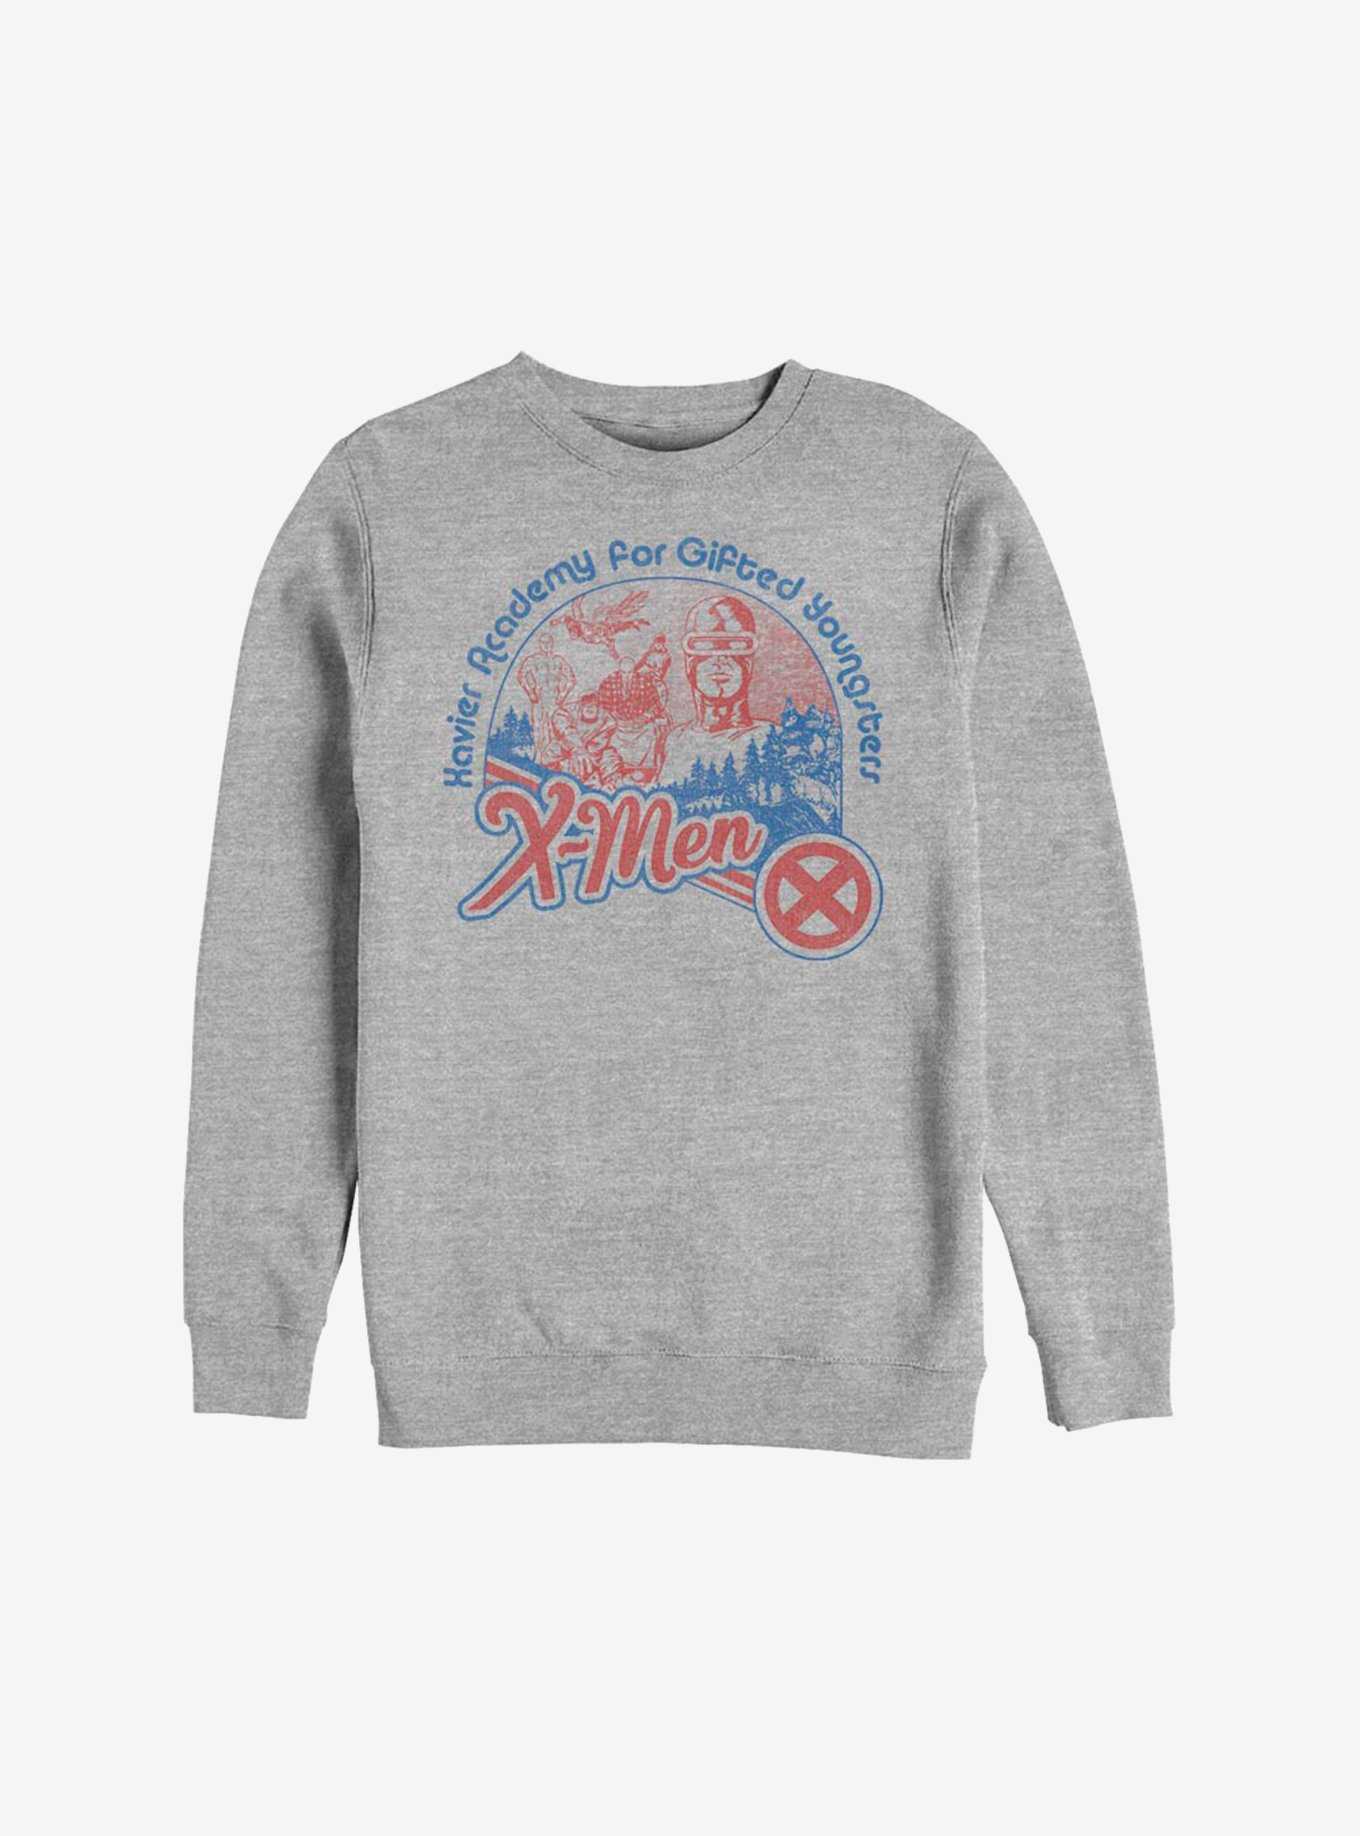 Marvel X-Men Academy For Gifted Youngsters Sweatshirt, , hi-res